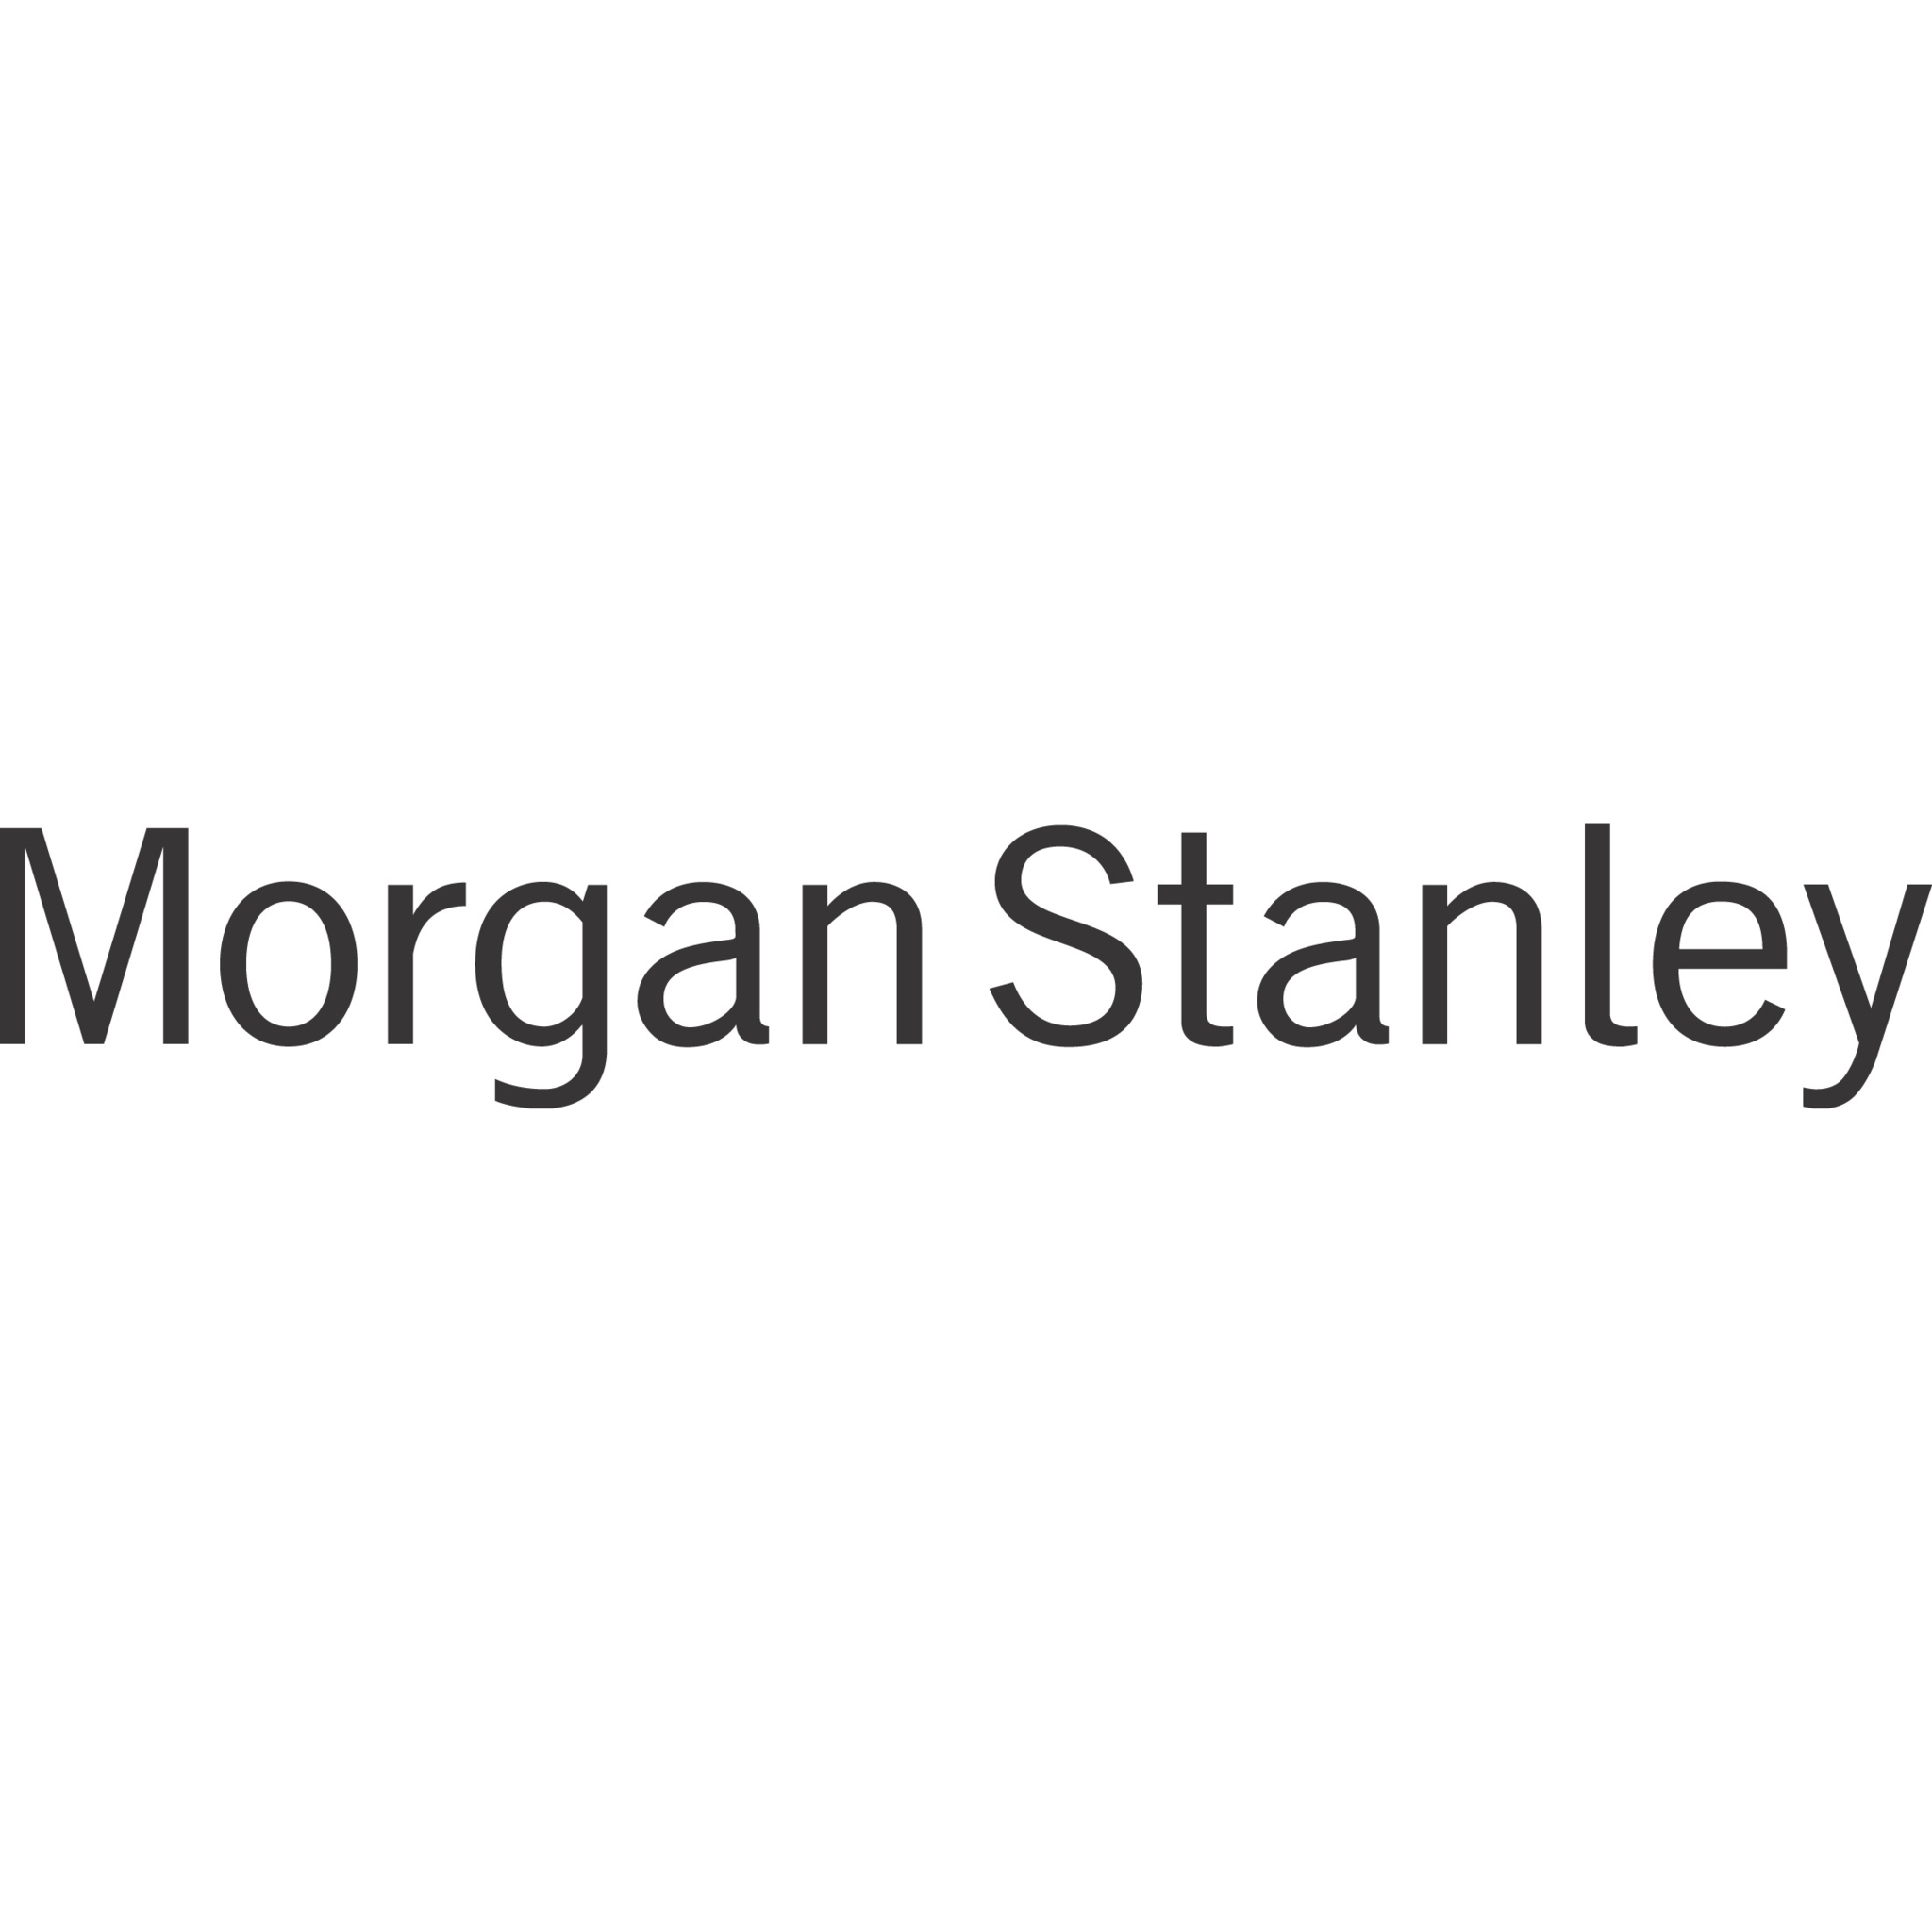 Morgan Stanley Financial Advisors - Investment Advisory Services